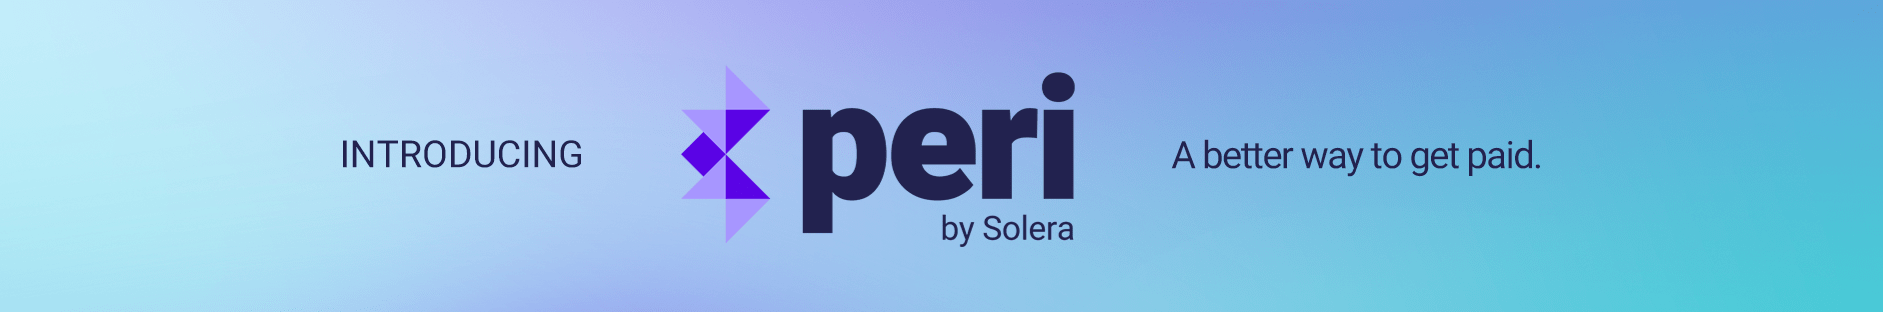 Introducing Peri by Solera. A better to get paid.